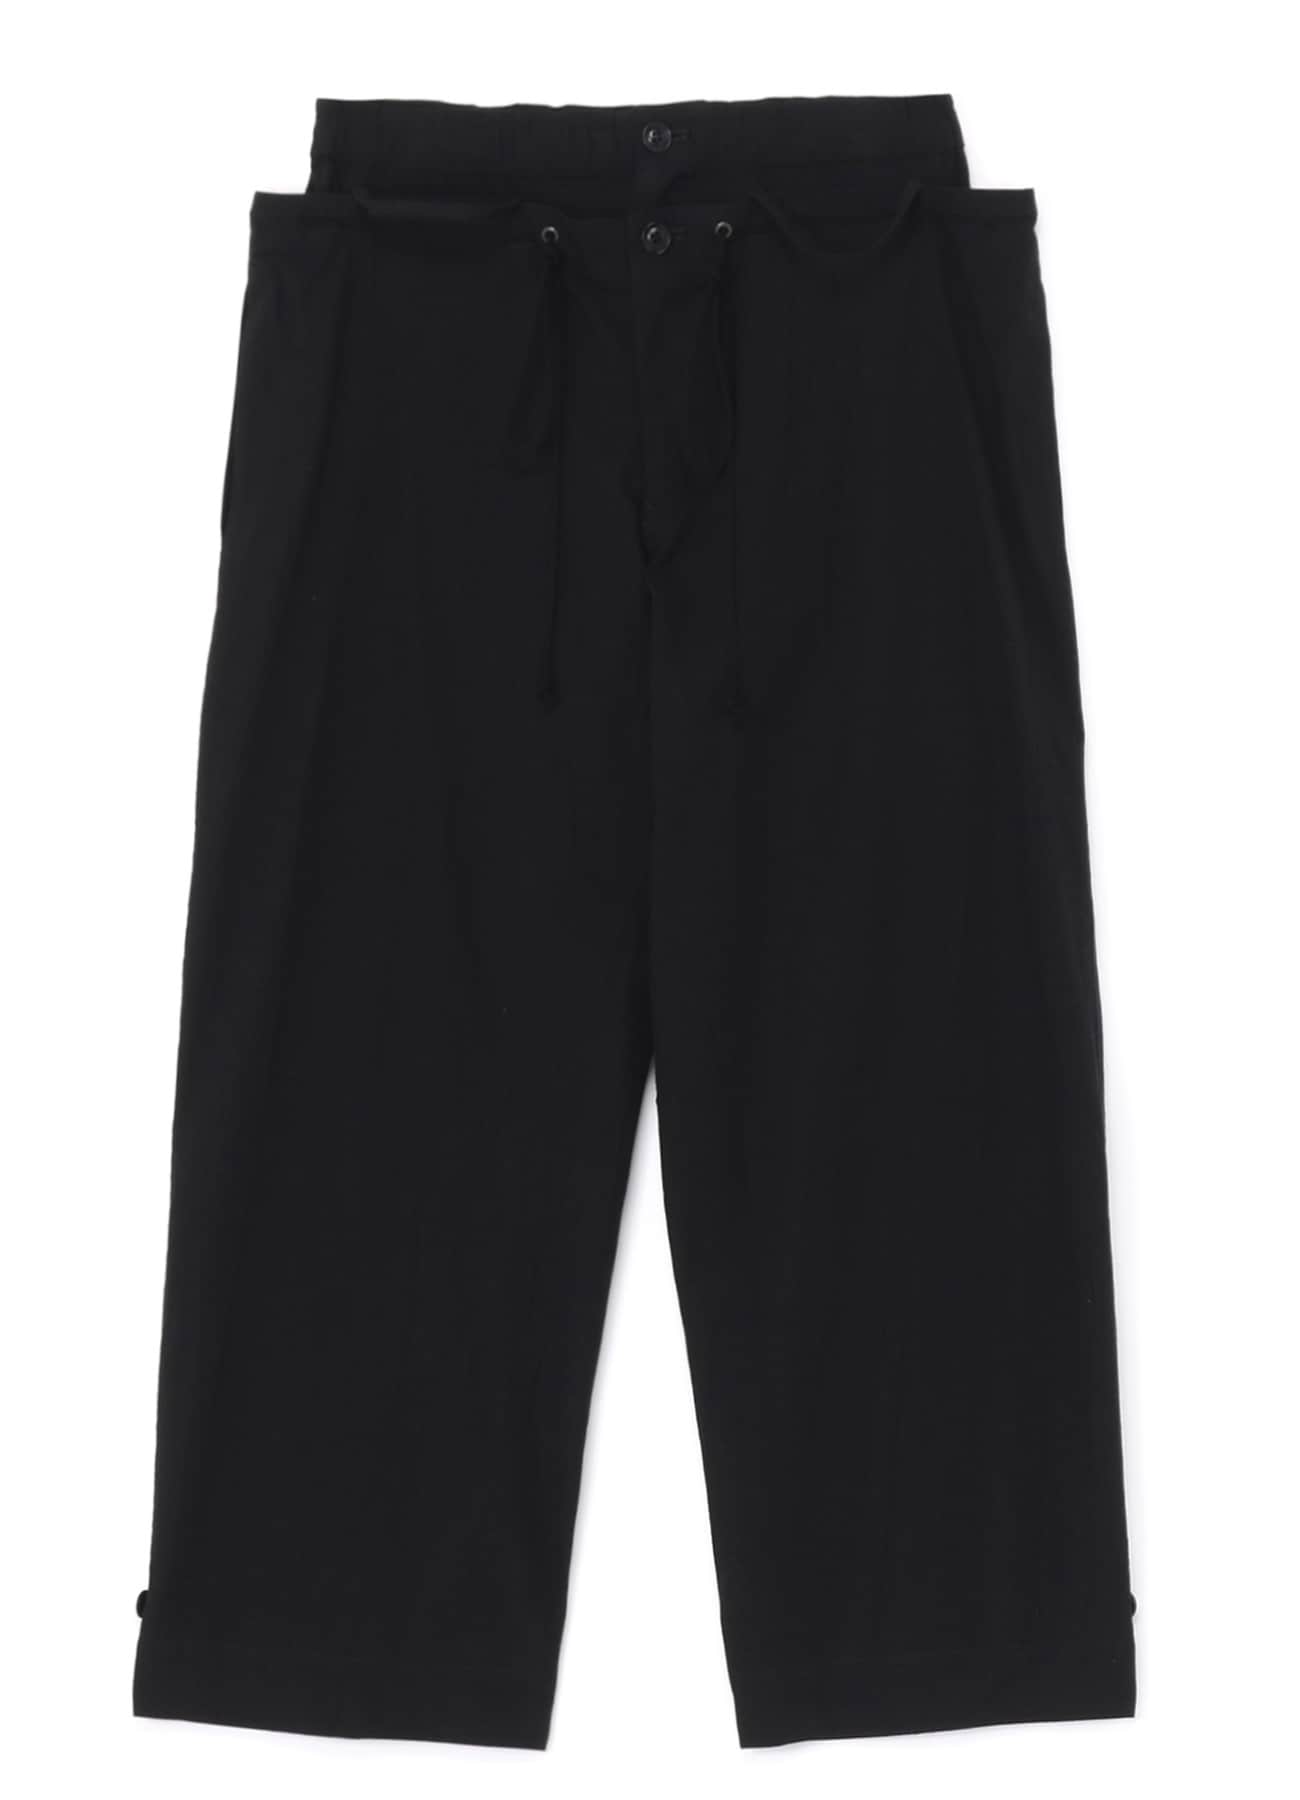 COTTON/LINEN PANTS WITH GATHERED HEMS(XS Black): Vintage 1.1｜THE